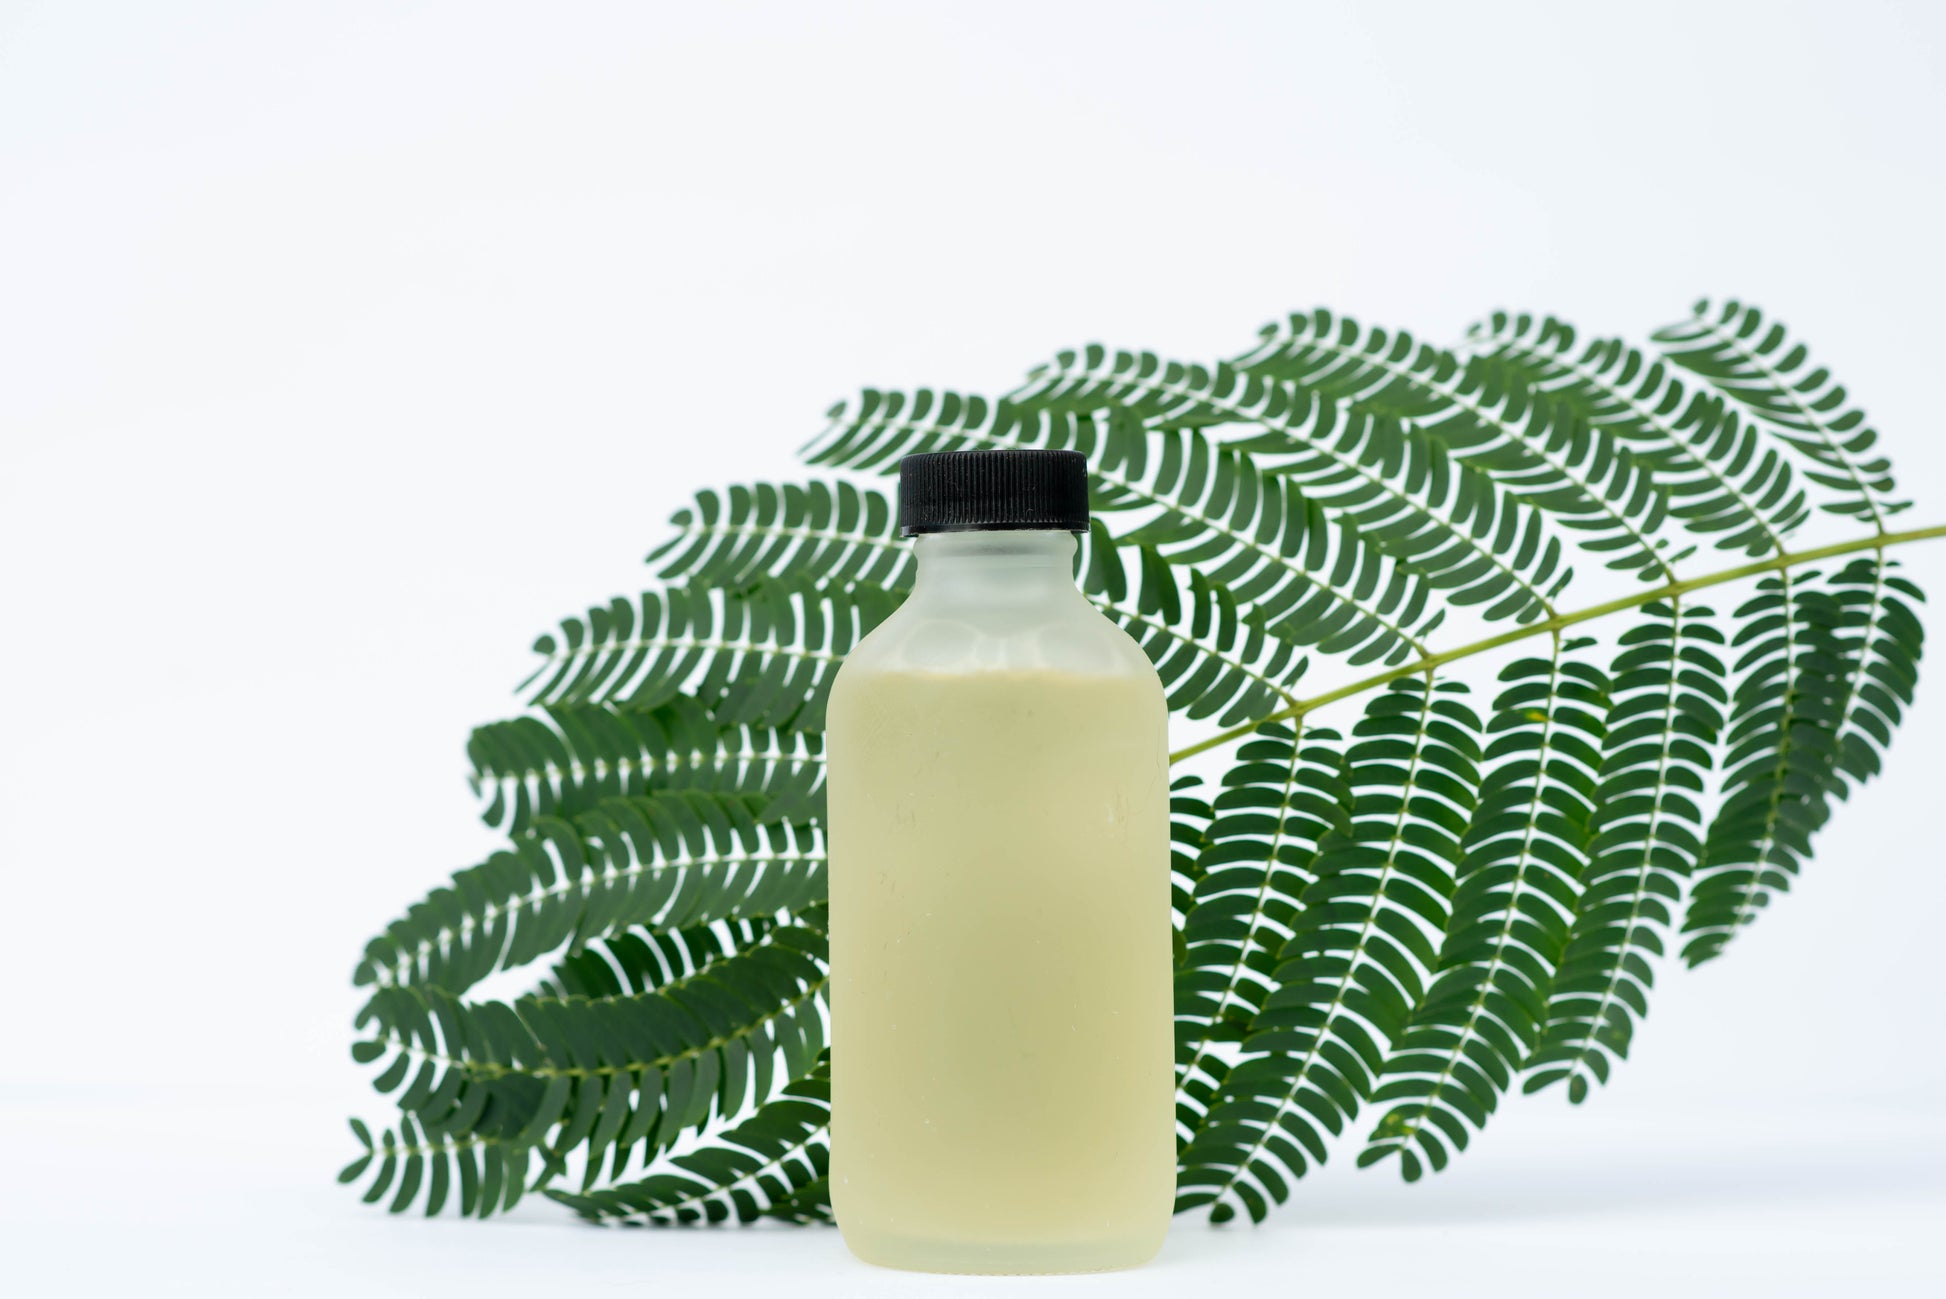 Refreshing Toner for Oily, Dry, and Combination Skin with ACV 4oz bottle on white ground and green leaf